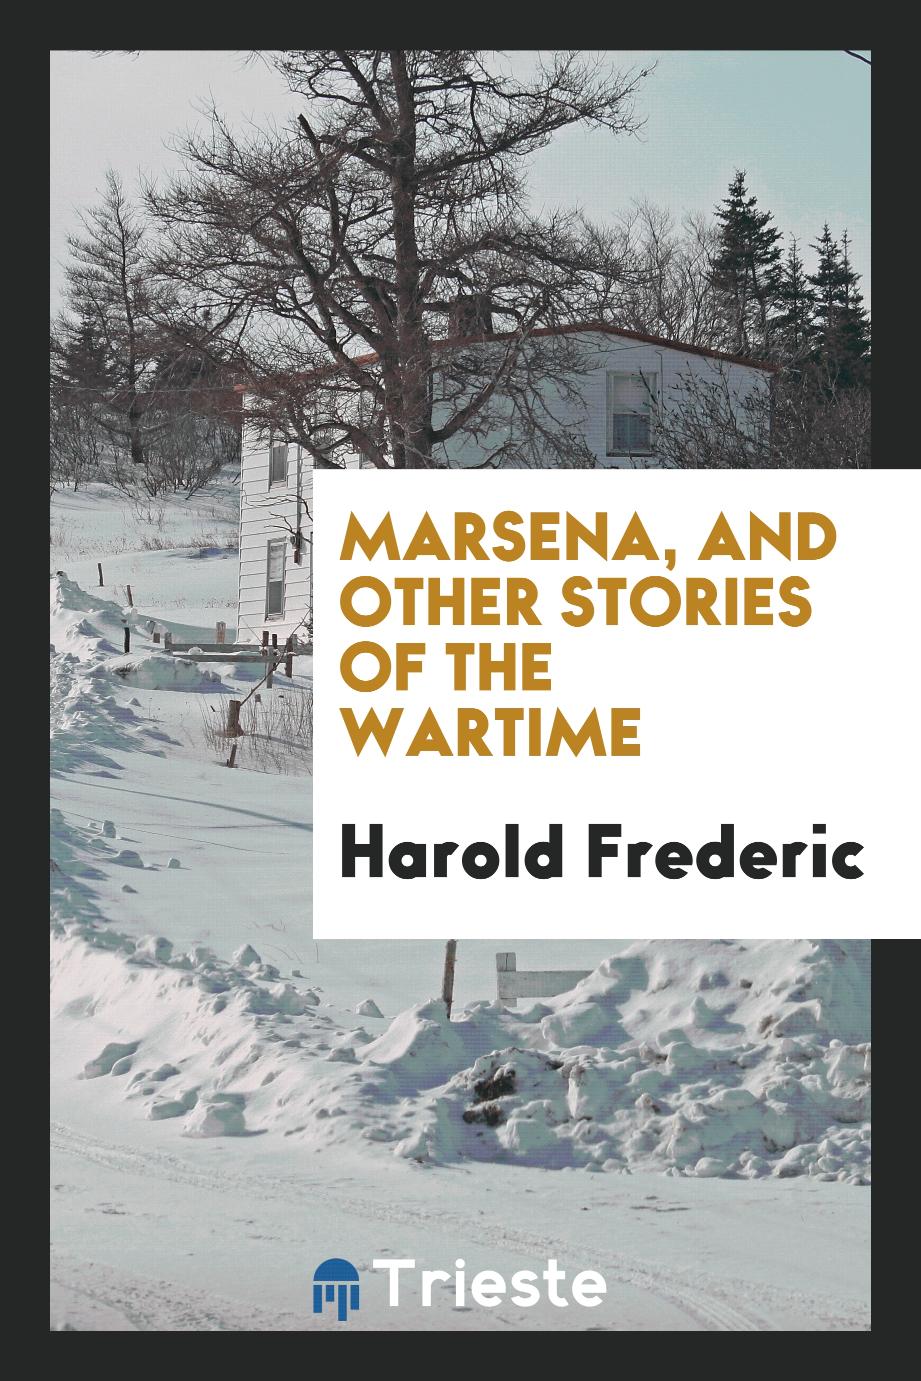 Marsena, and other stories of the wartime